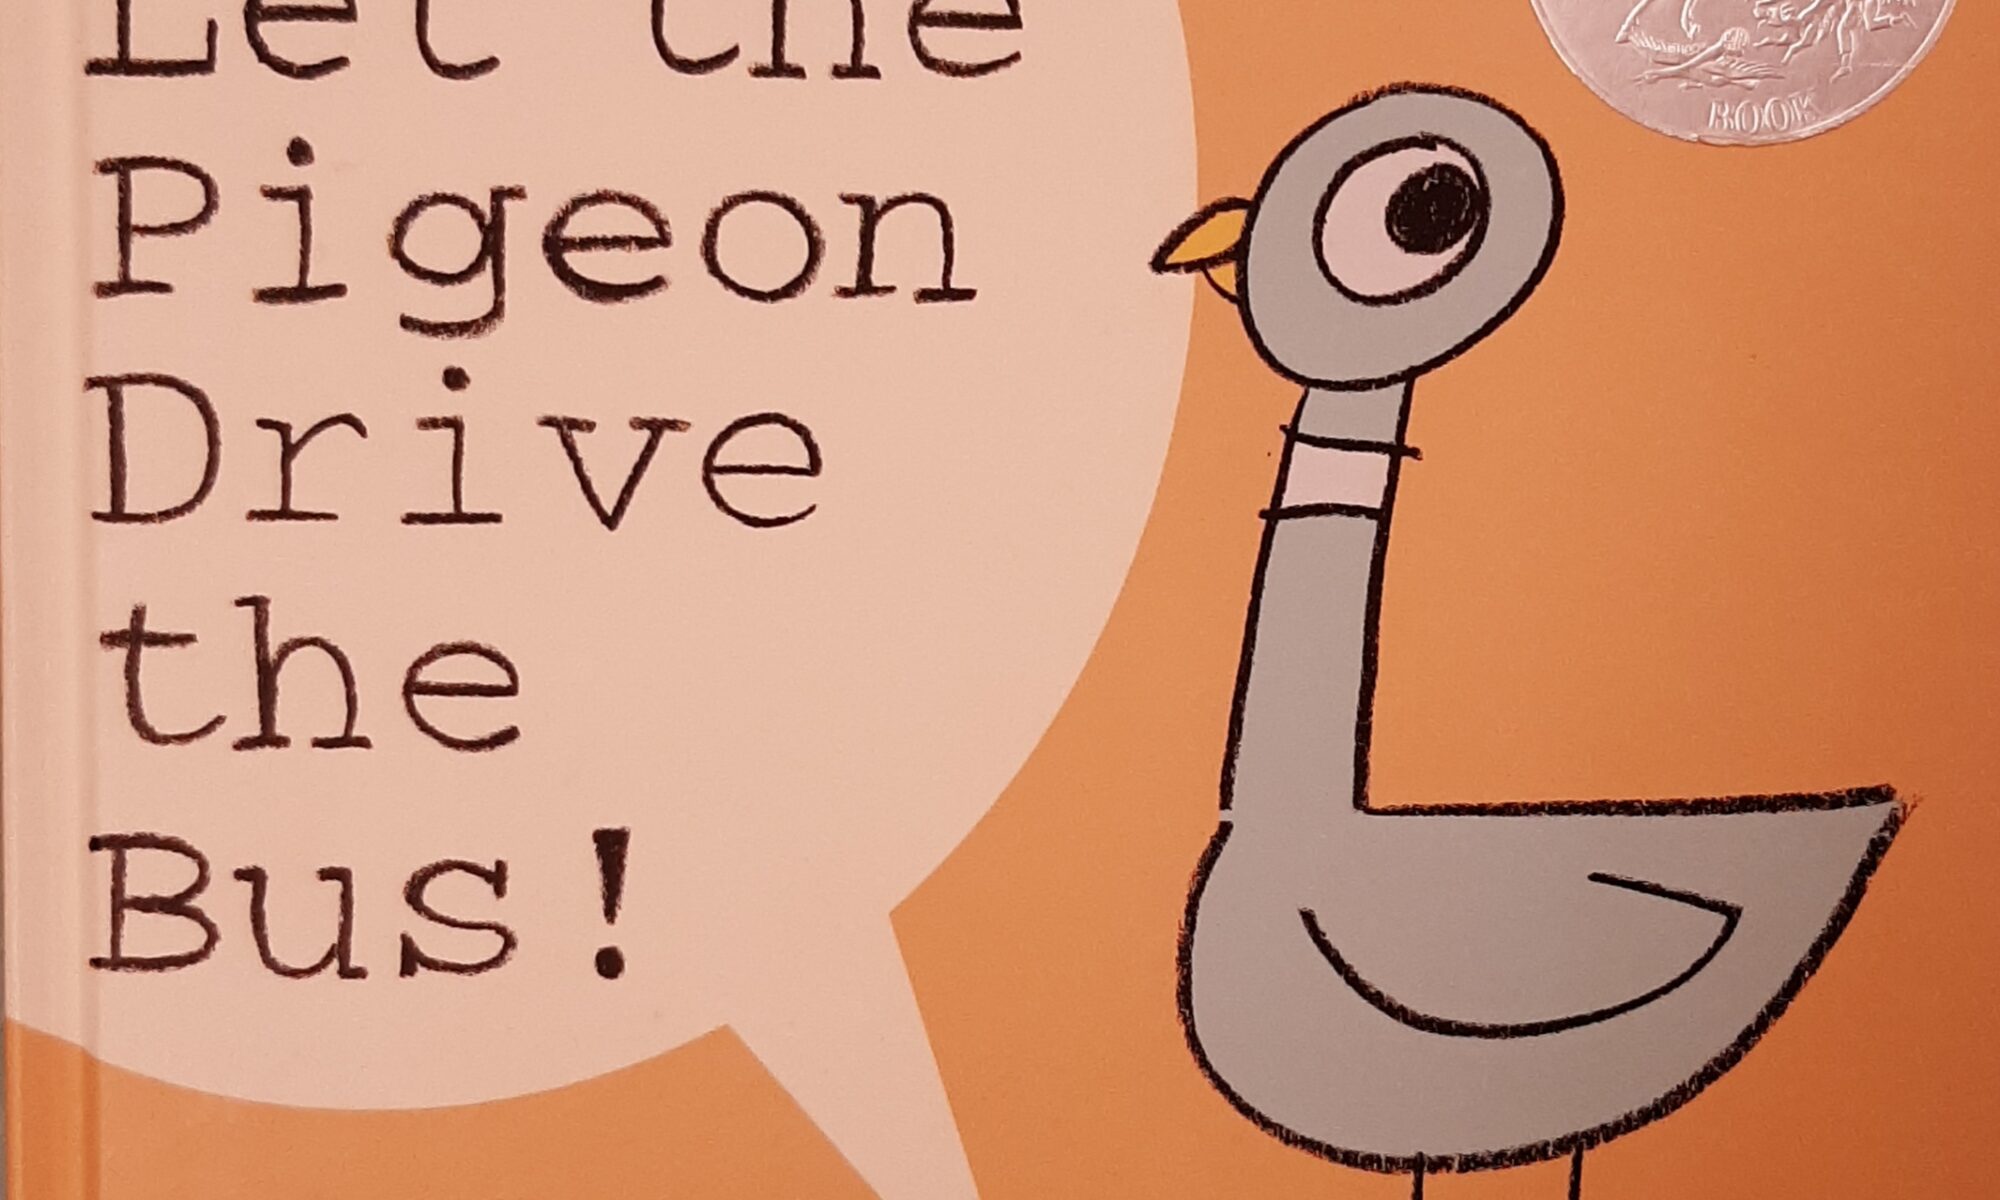 Don't Let the PIgeon Drive the Bus